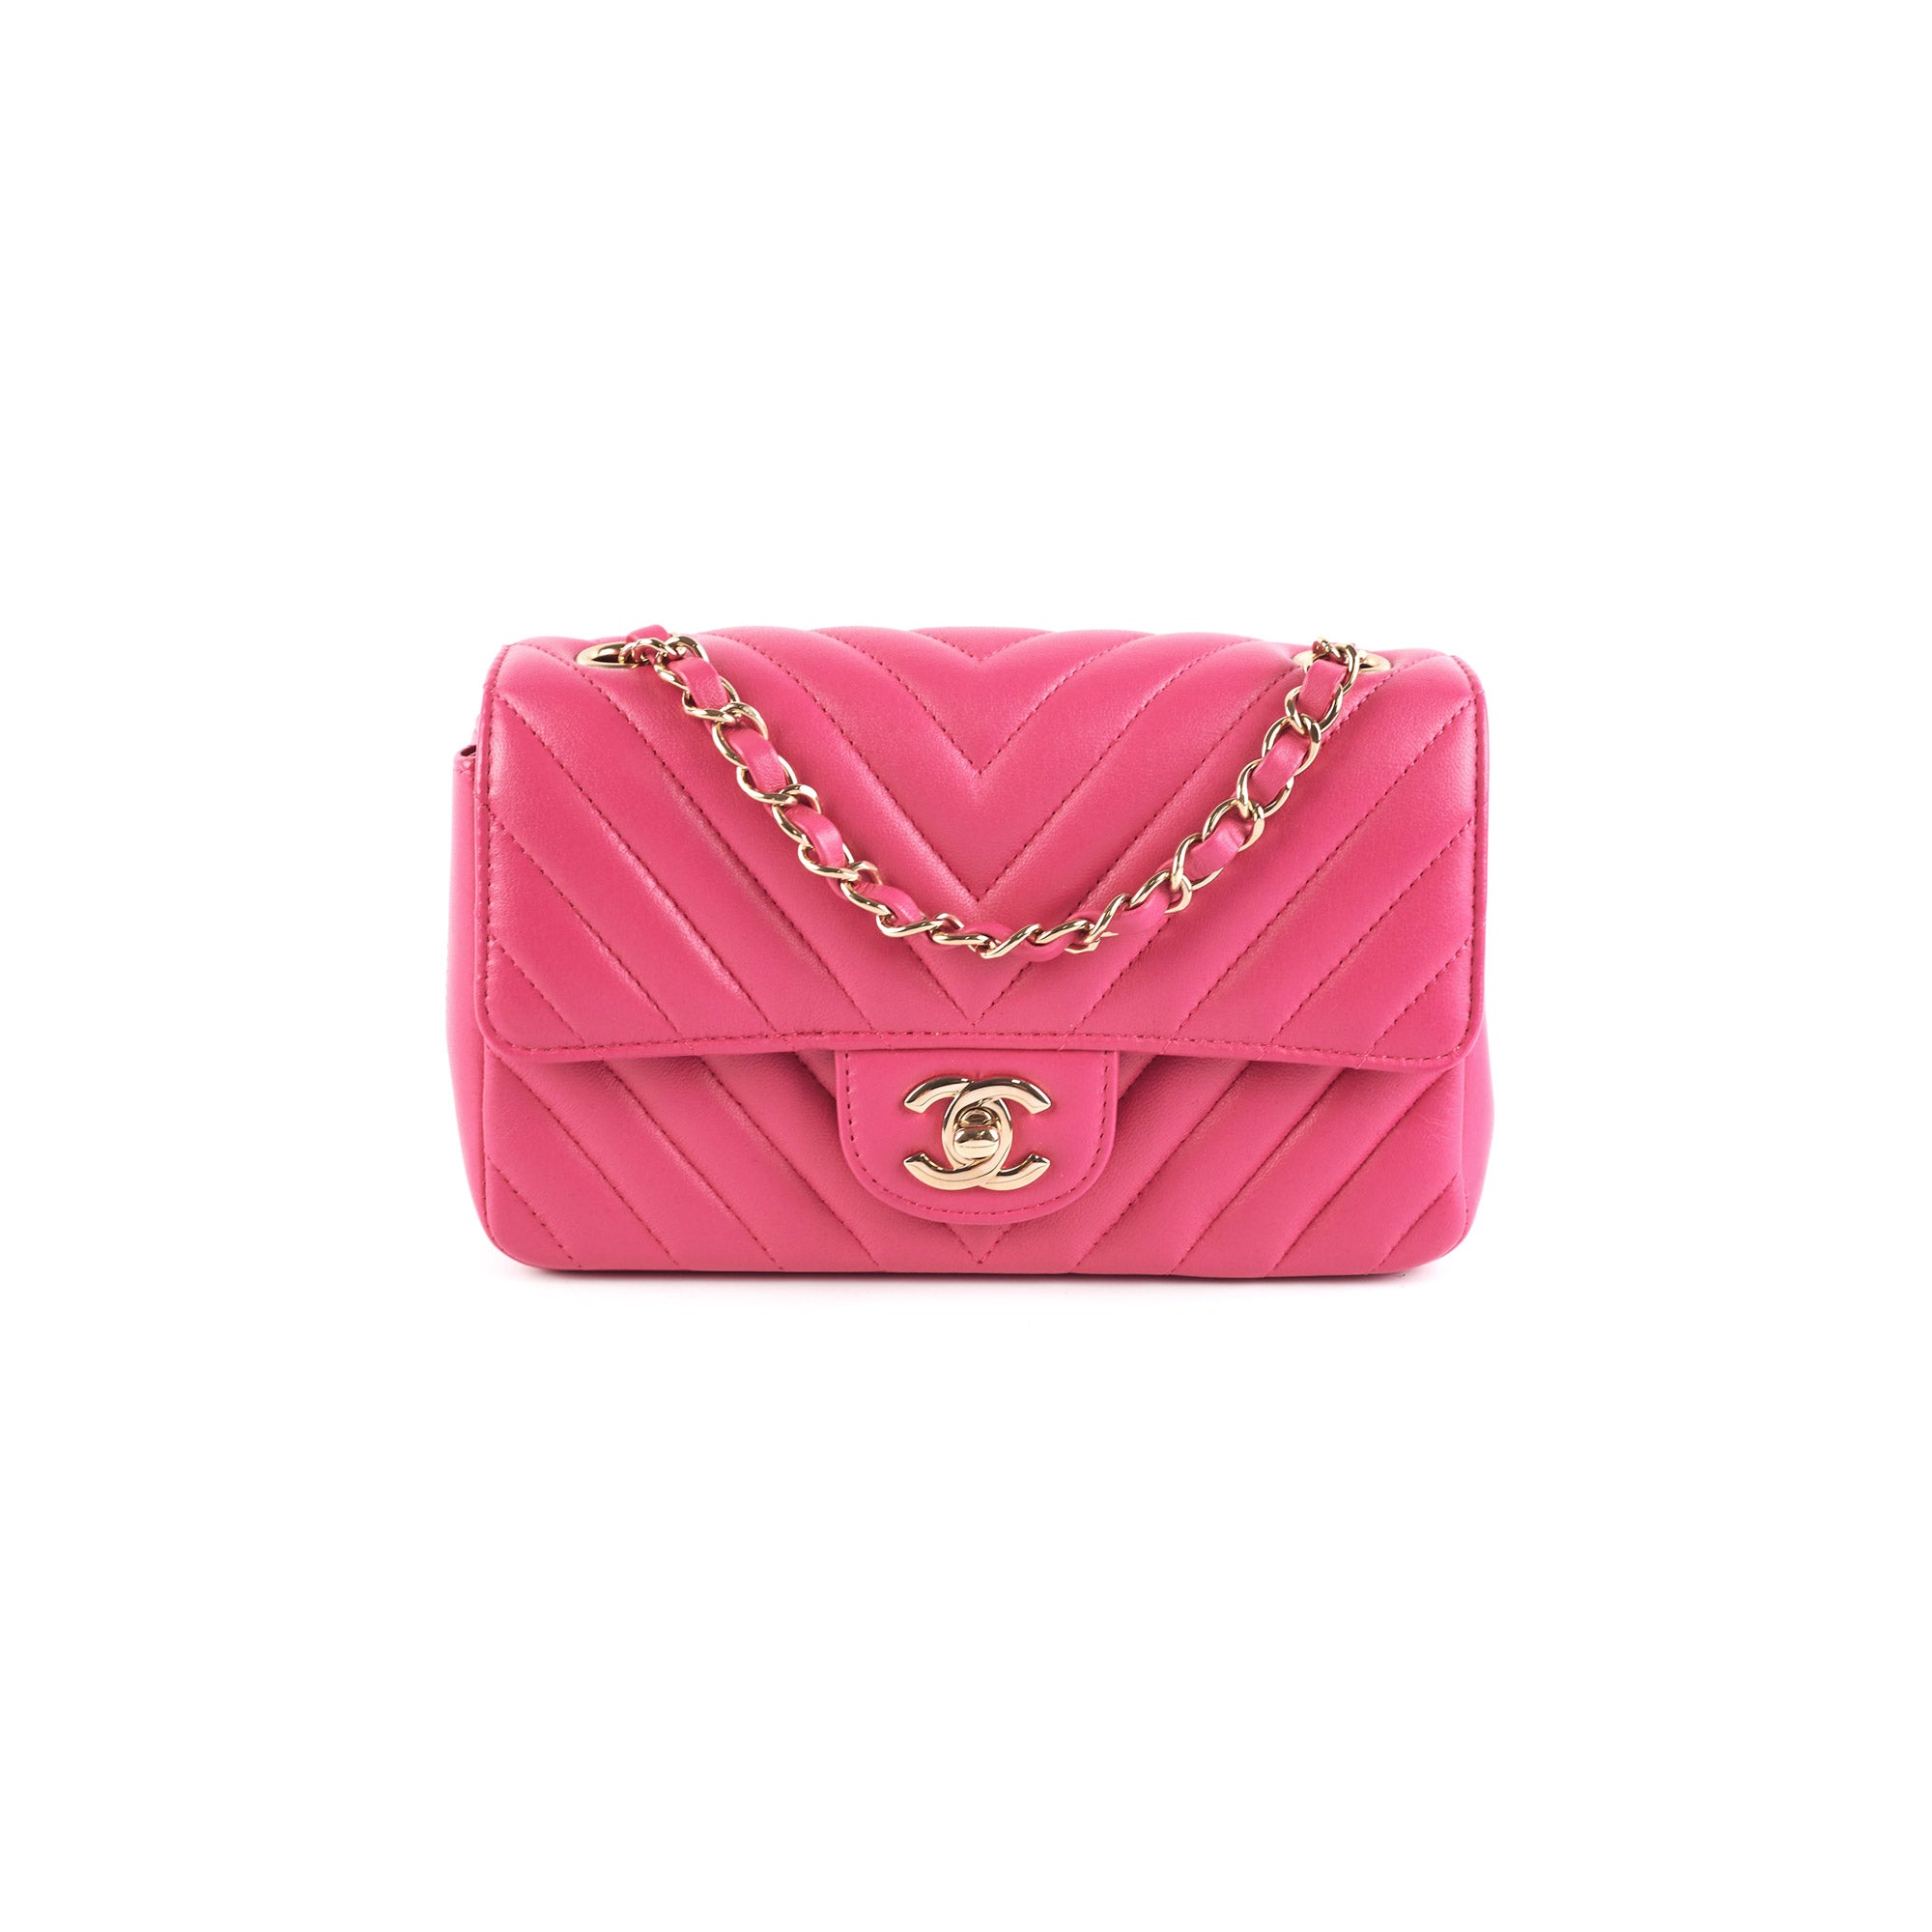 BagButler - The Chanel Pink Chevron Mini Flap bag is undeniably one of the  most-adored pieces by our rental fashion lovers!⁠ ⁠ In a whimsical pink  hue, this one adds an ultra-feminine